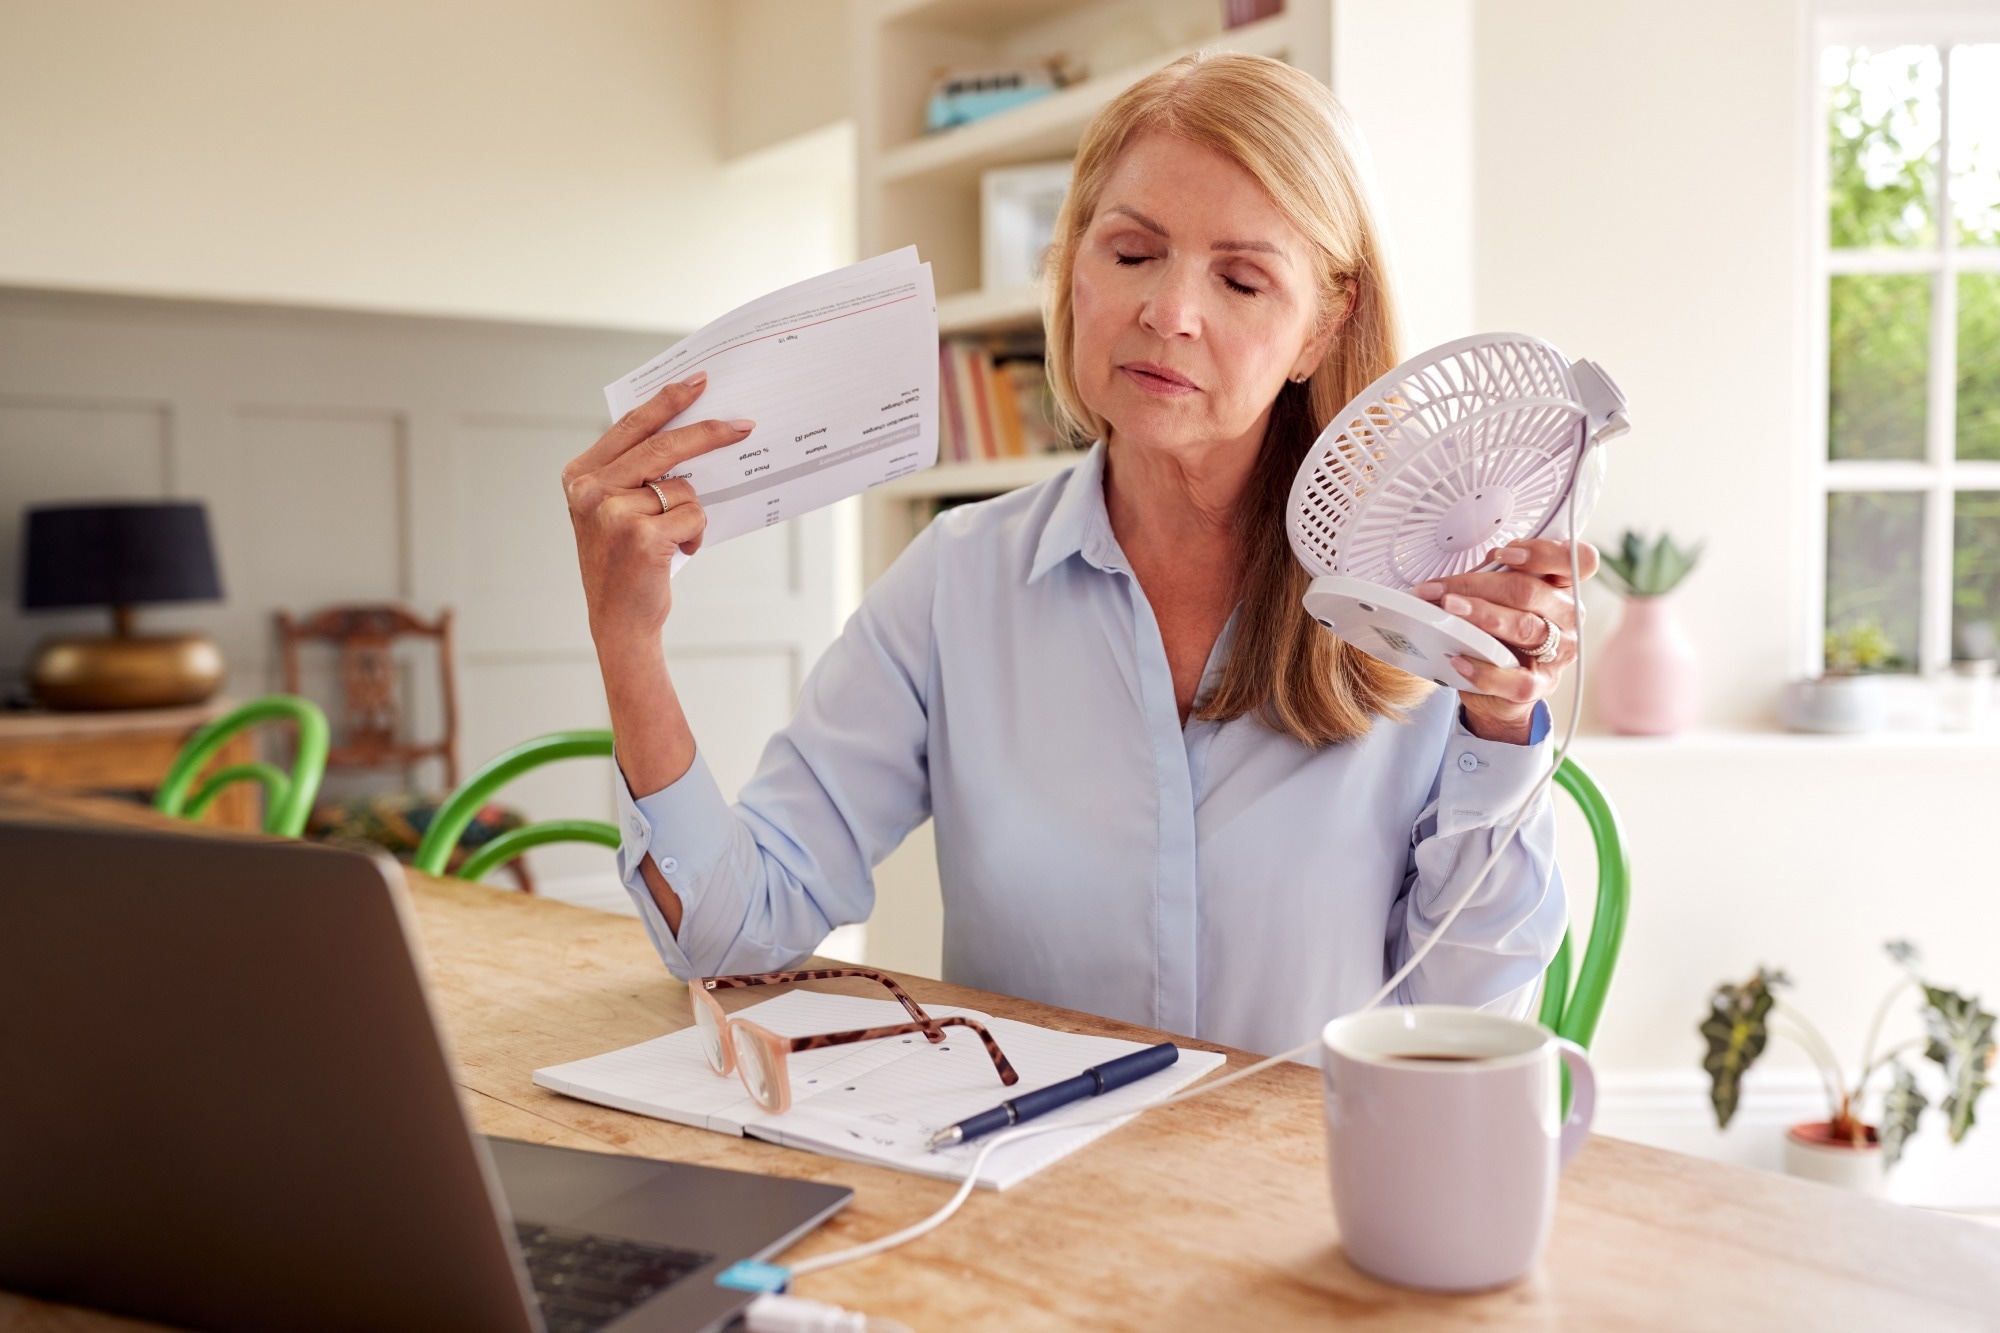 Study: Experience and severity of menopause symptoms and effects on health-seeking behaviours: a cross-sectional online survey of community dwelling adults in the United Kingdom. Image Credit: MonkeyBusinessImages/Shutterstock.com